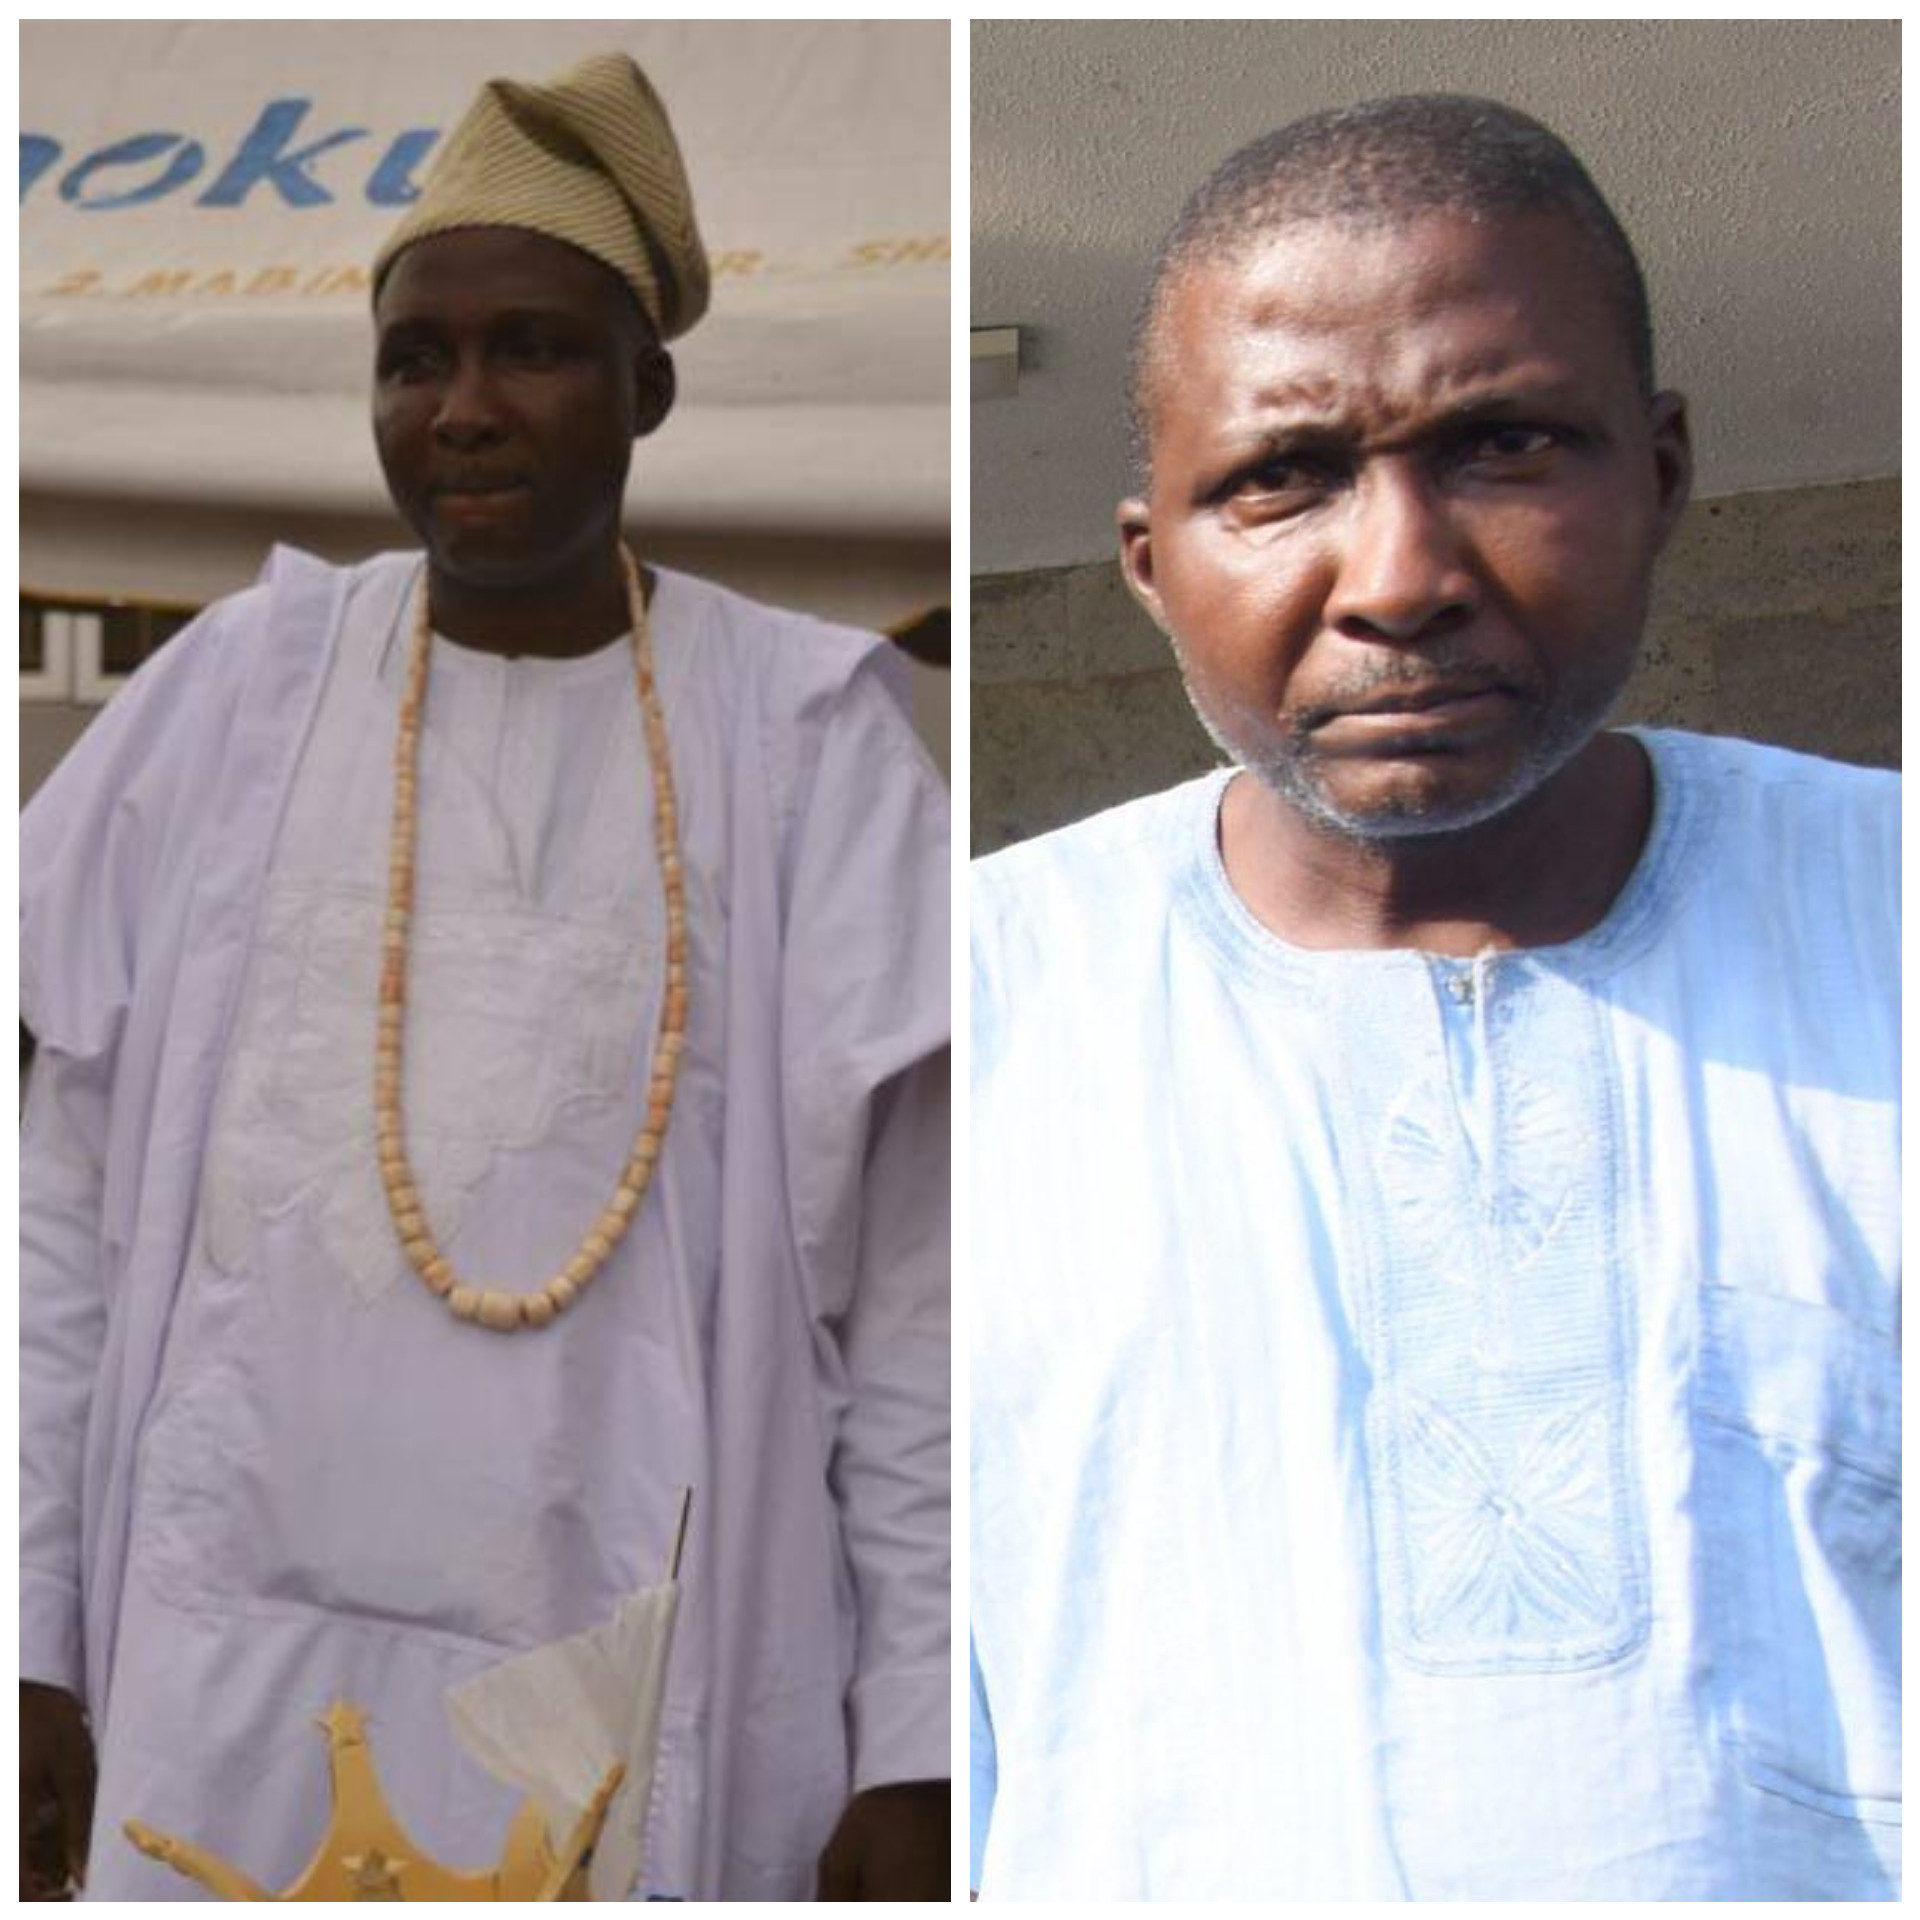 DETHRONED LAGOS TRADITIONAL RULER SENTENCED TO 15 YEARS IN PRISON FOR FAKING OWN KIDNAP